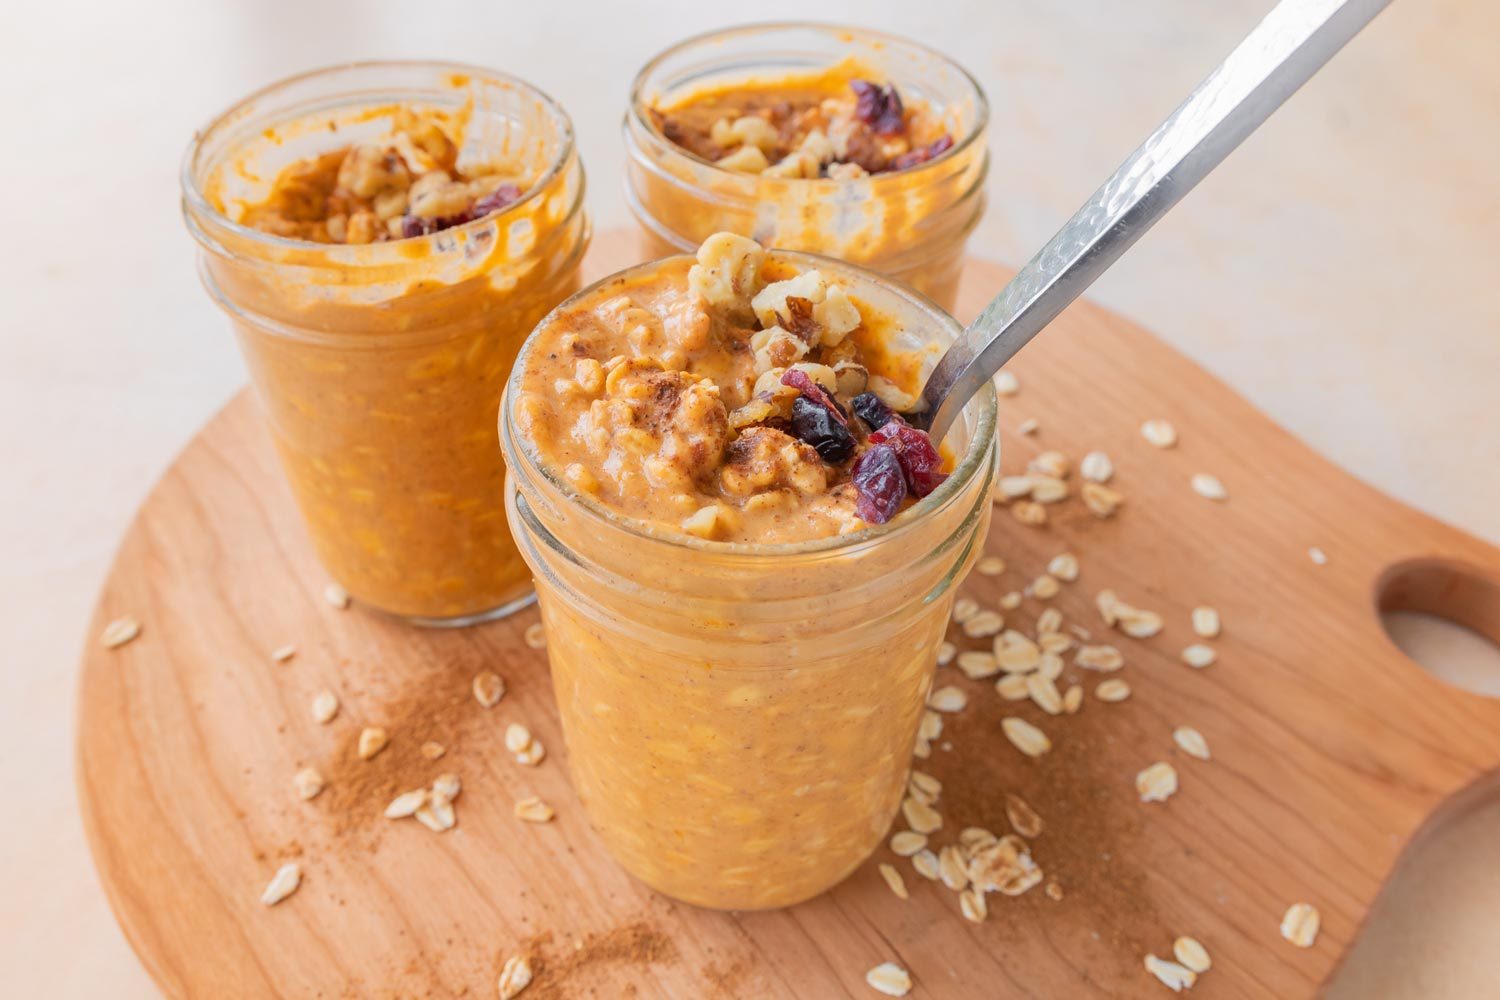 https://www.tasteofhome.com/wp-content/uploads/2023/10/Styled-Pumpkin-Pie-Overnight-Oats-Molly-Allen-for-TOH-Resize-Recolor-Crop-DH-TOH.jpg